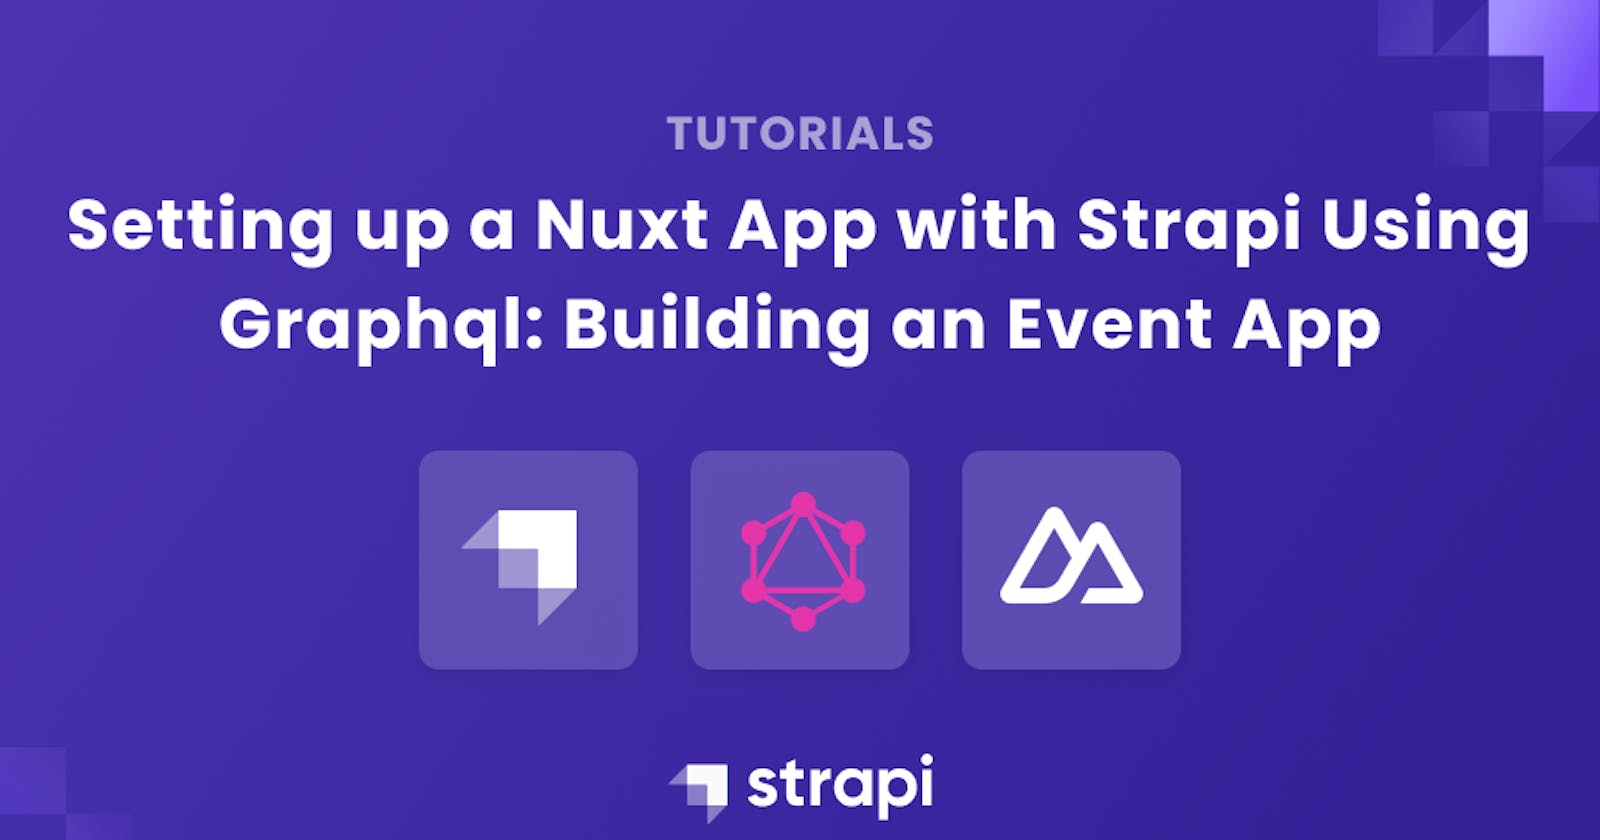 Setting up a Nuxt App with Strapi Using Graphql: Building an Event App